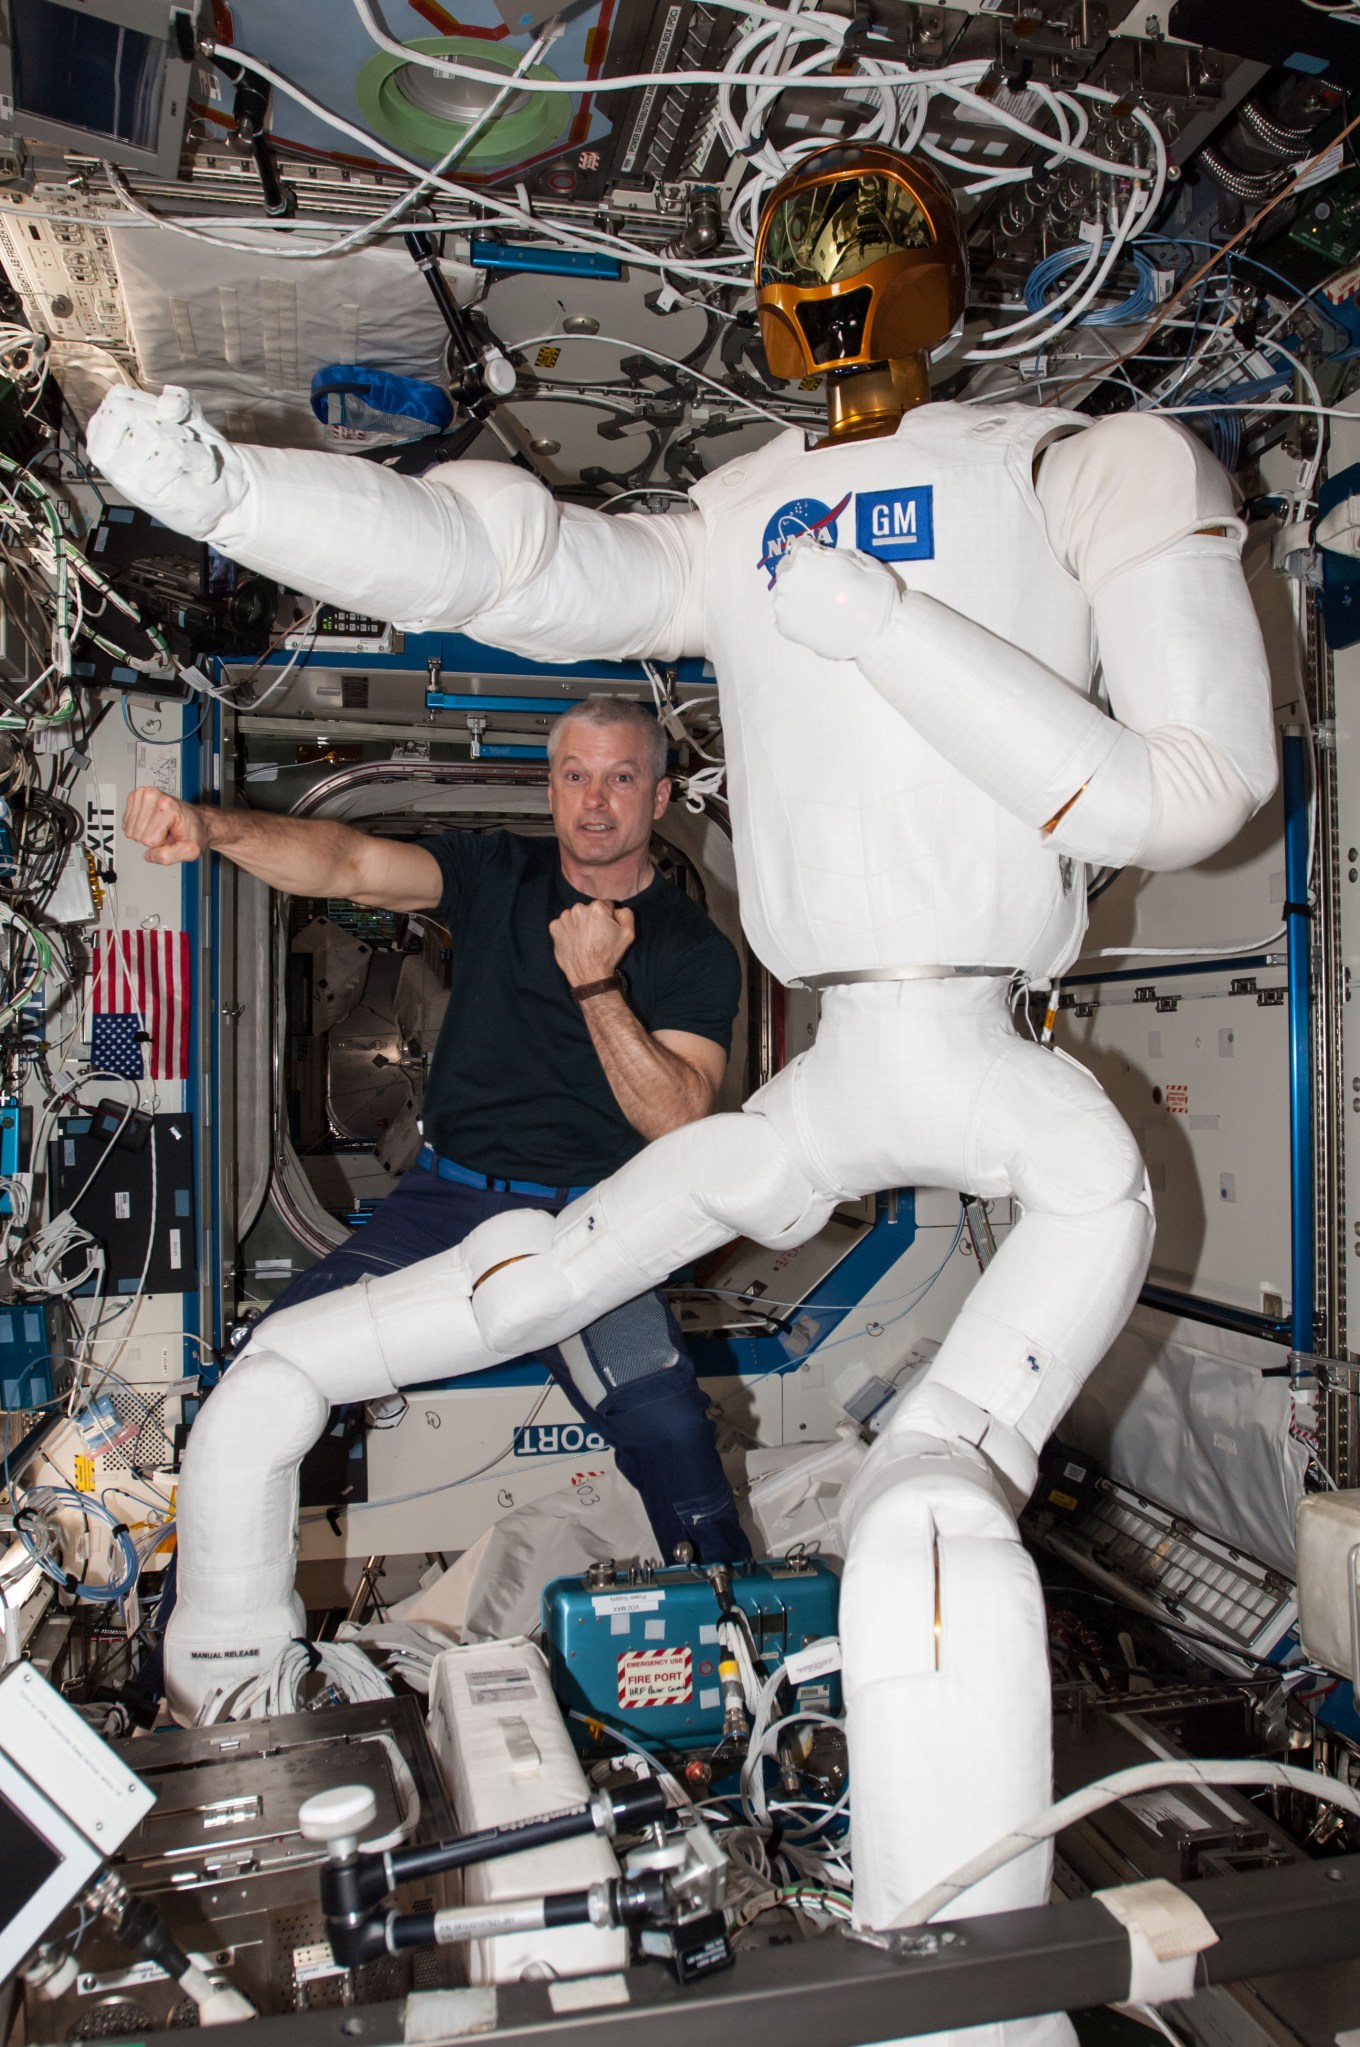 Photograph of Astronaut Steve Swanson,Expedition 40 Commander,taken with Robonaut after installation of the Robonaut legs. Robon